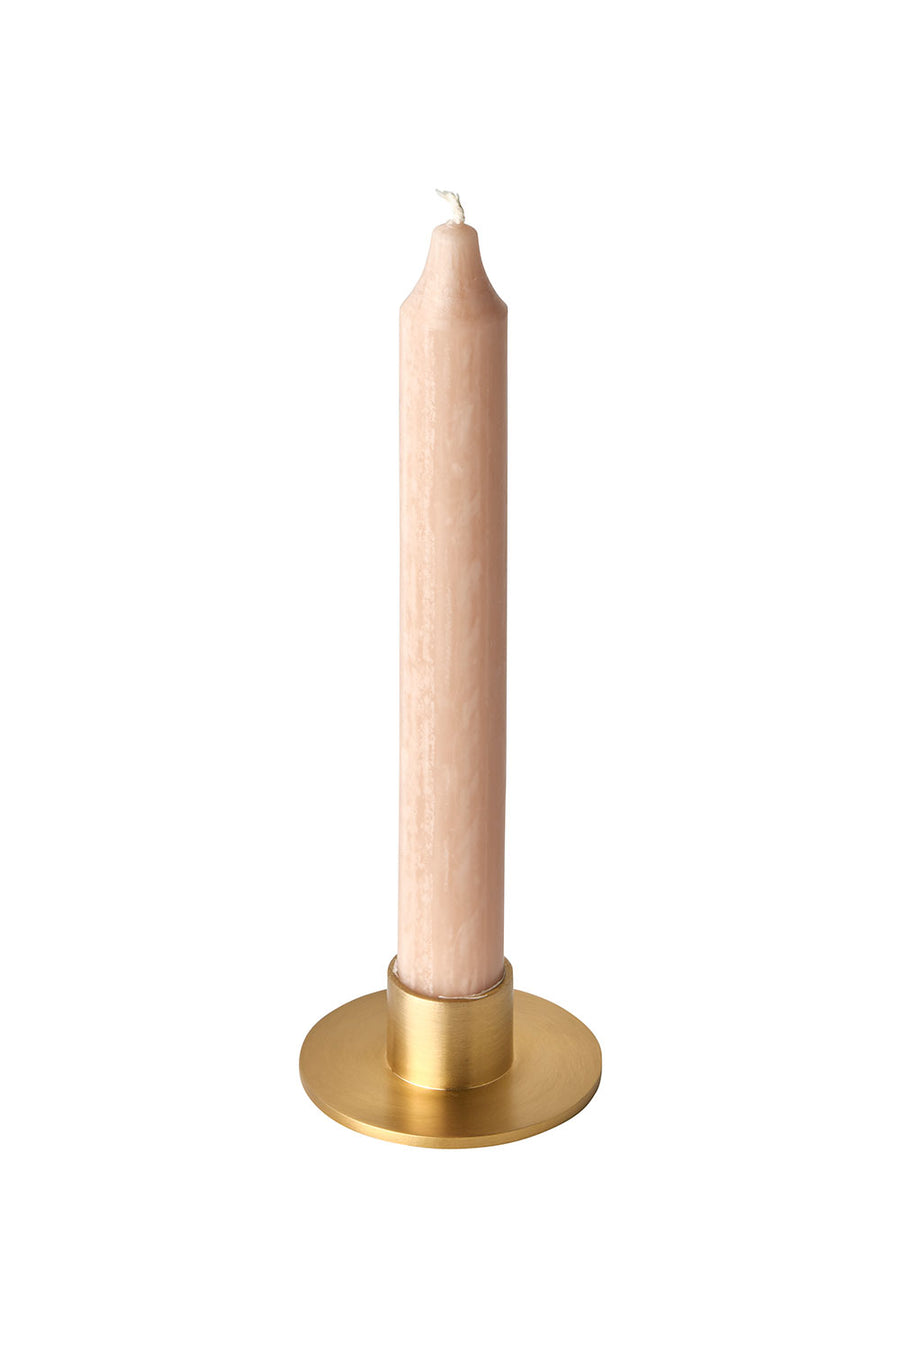 BRASS TAPER CANDLE HOLDER